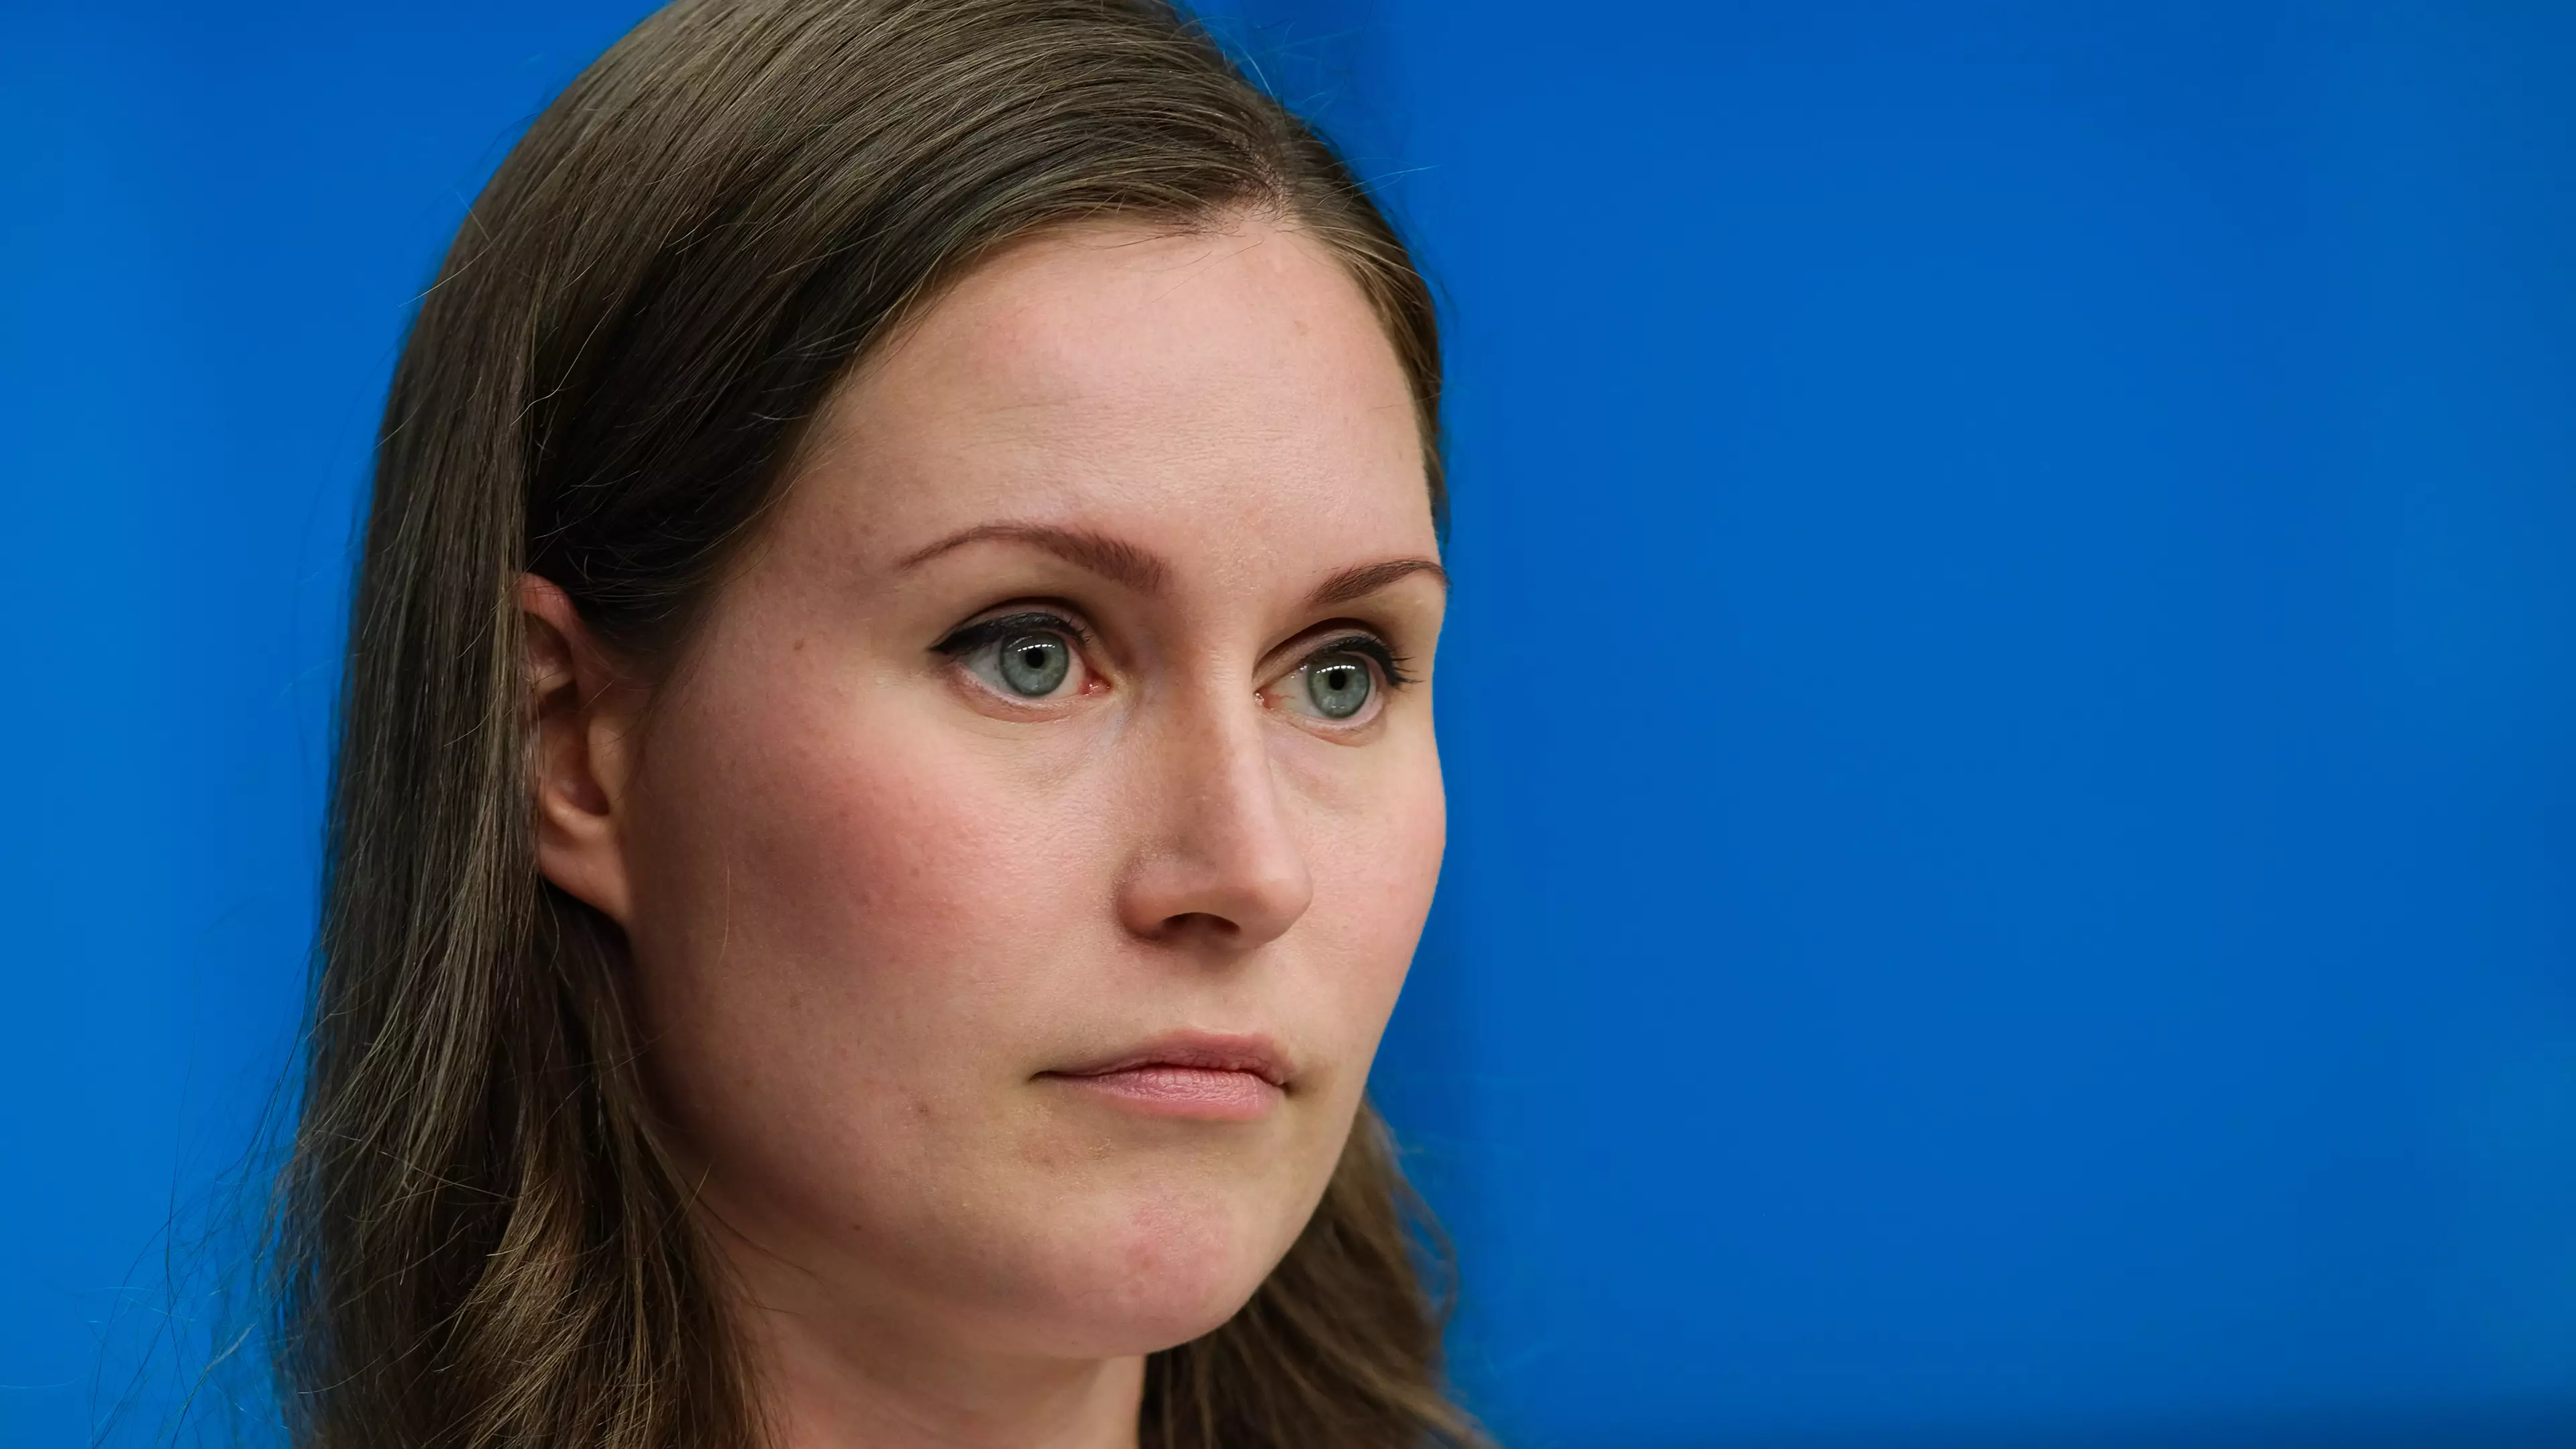 Finland's Sanna Marin Set To Become World's Youngest Prime Minister